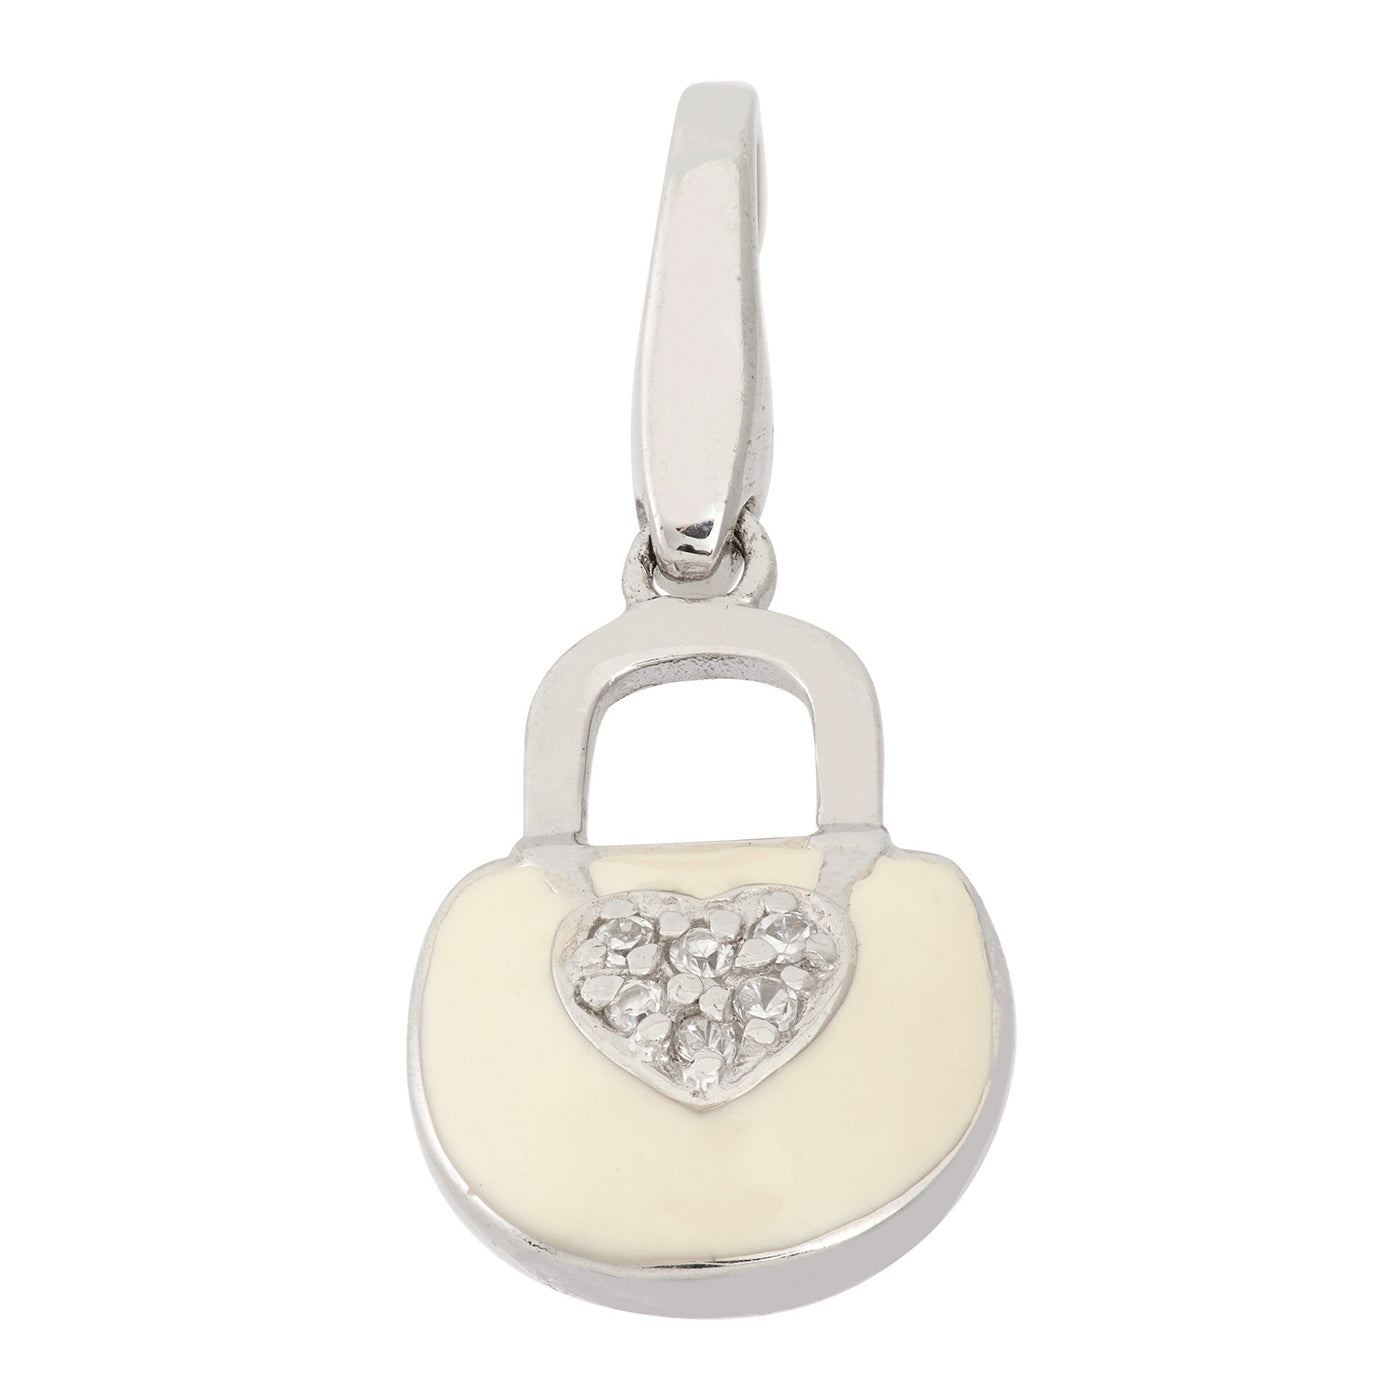 Rebecca Sloane Sterling Silver White Pocketbook With CZ Charm